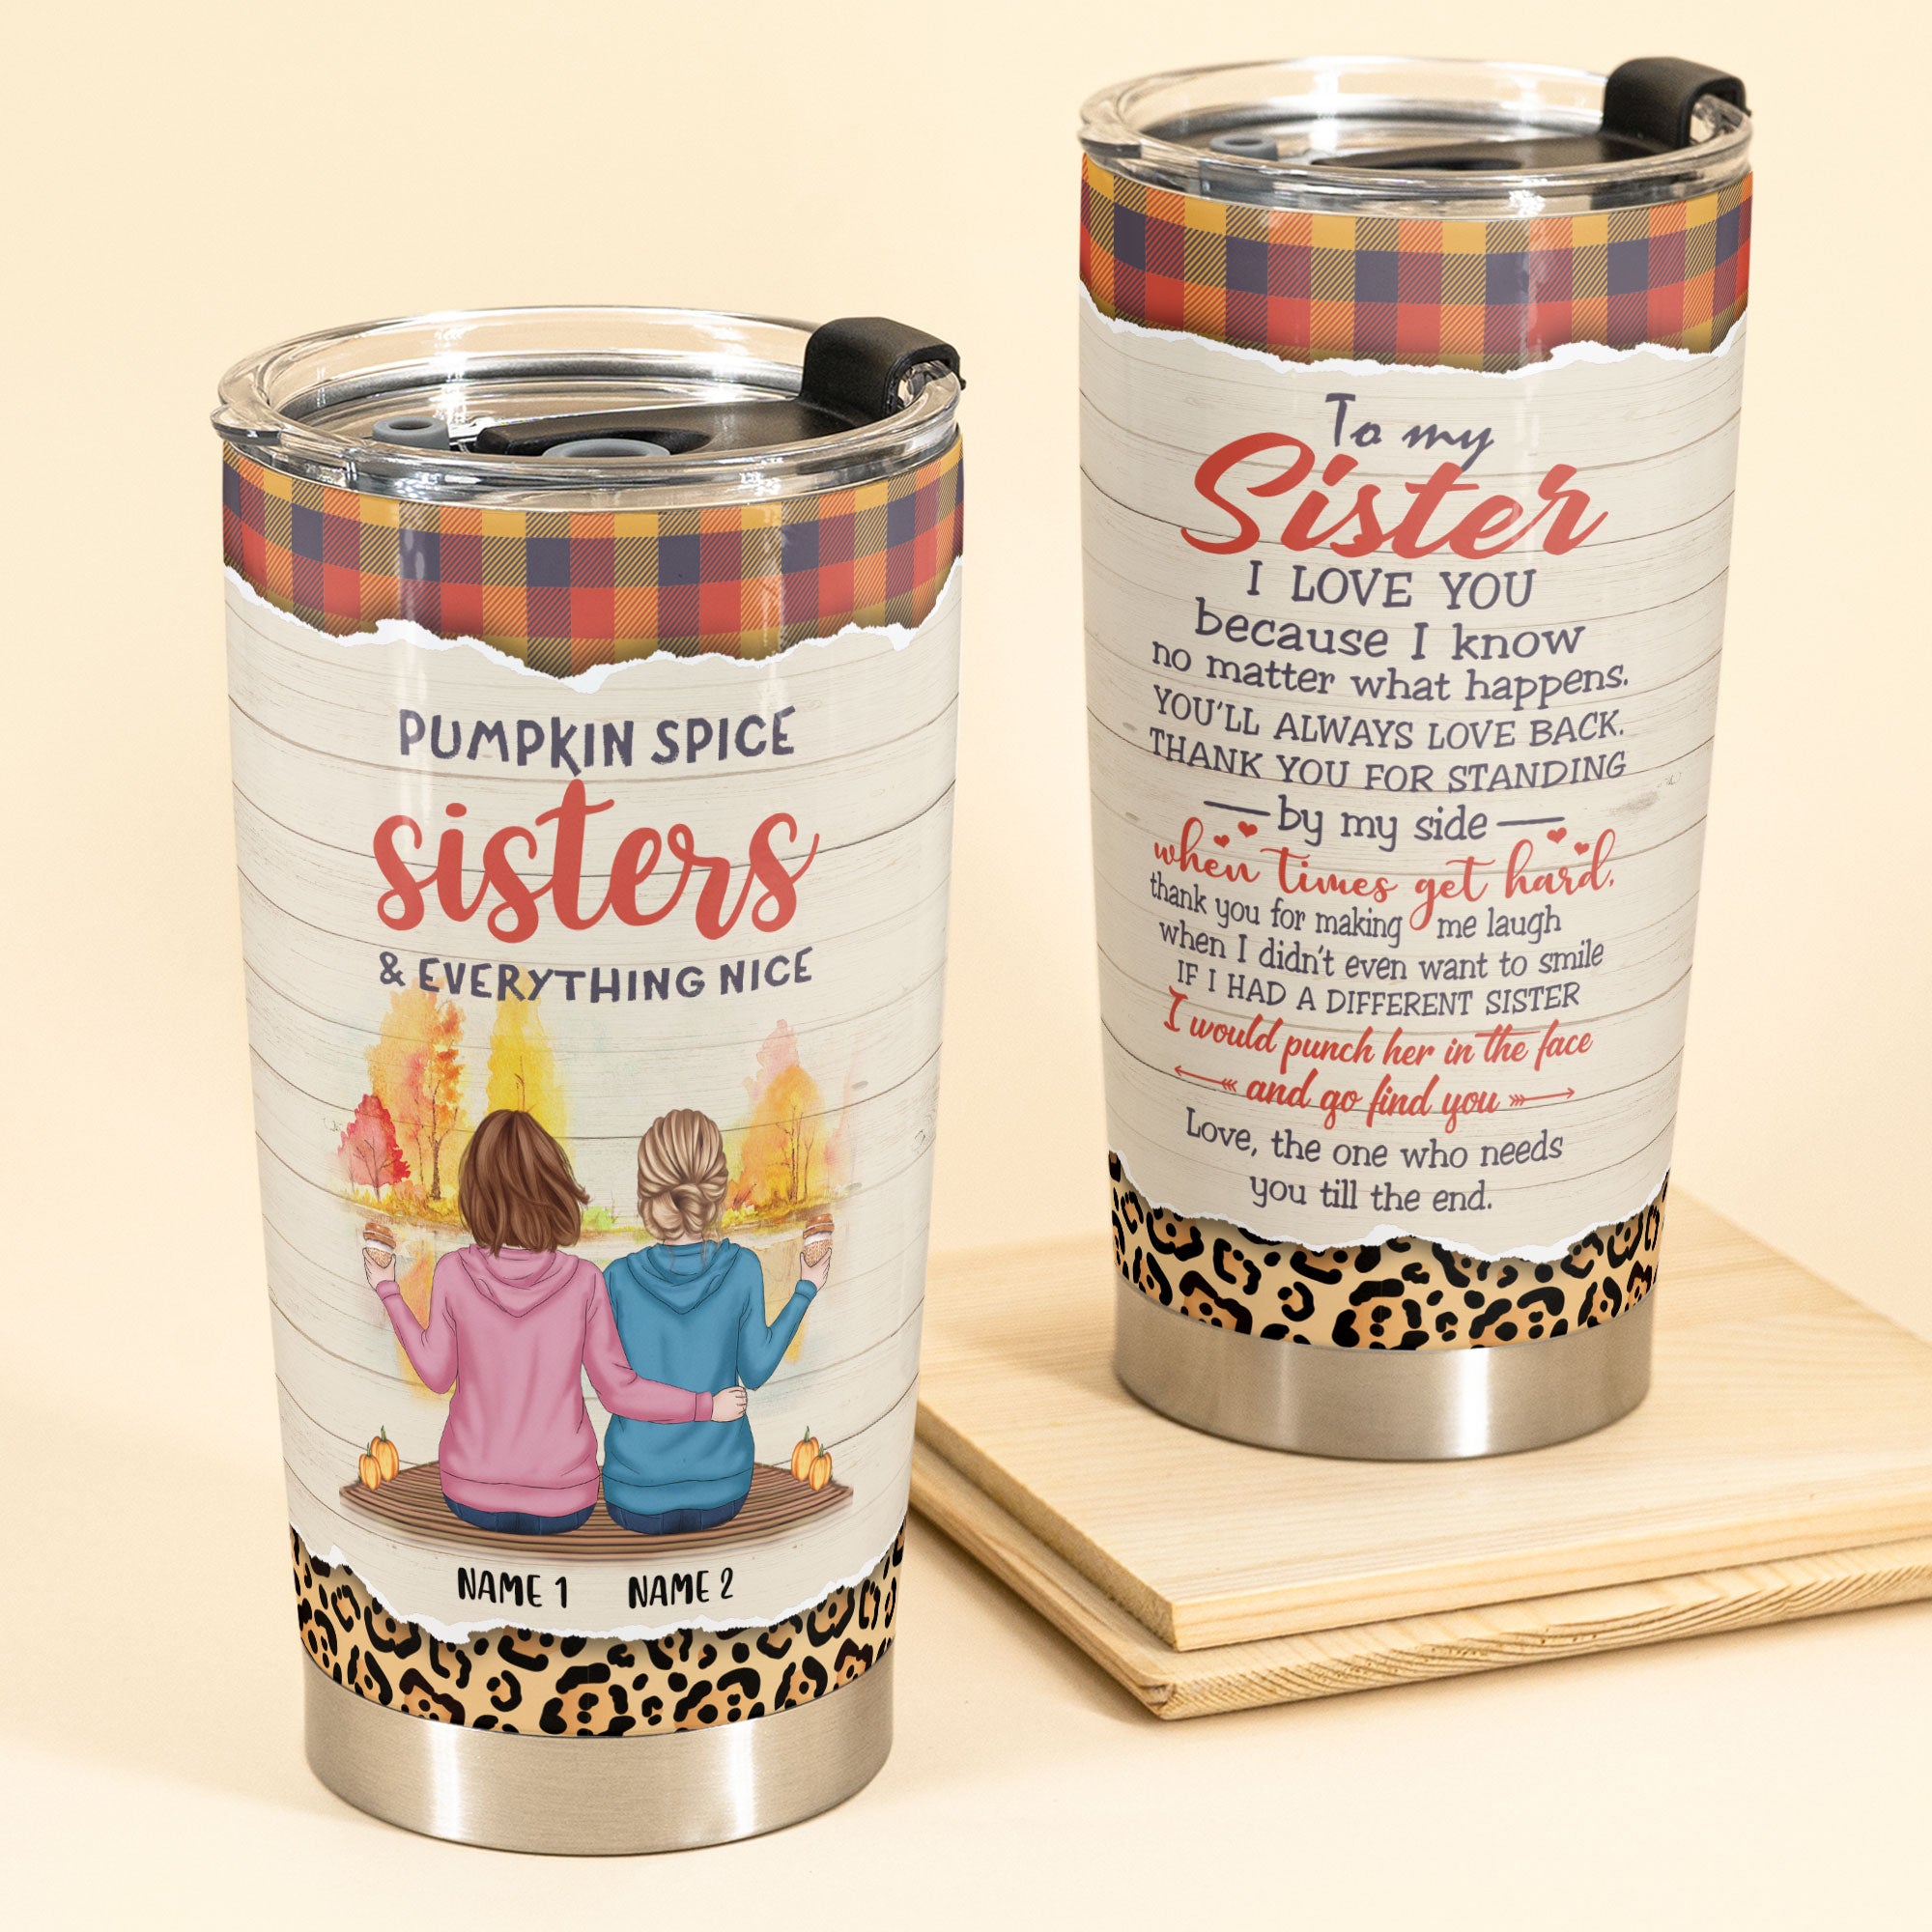 Pumpkin Spice Sisters & Everything Nice - Personalized Tumbler Cup - Fall Season Gift For Sisters - Autumn Sisters Sitting